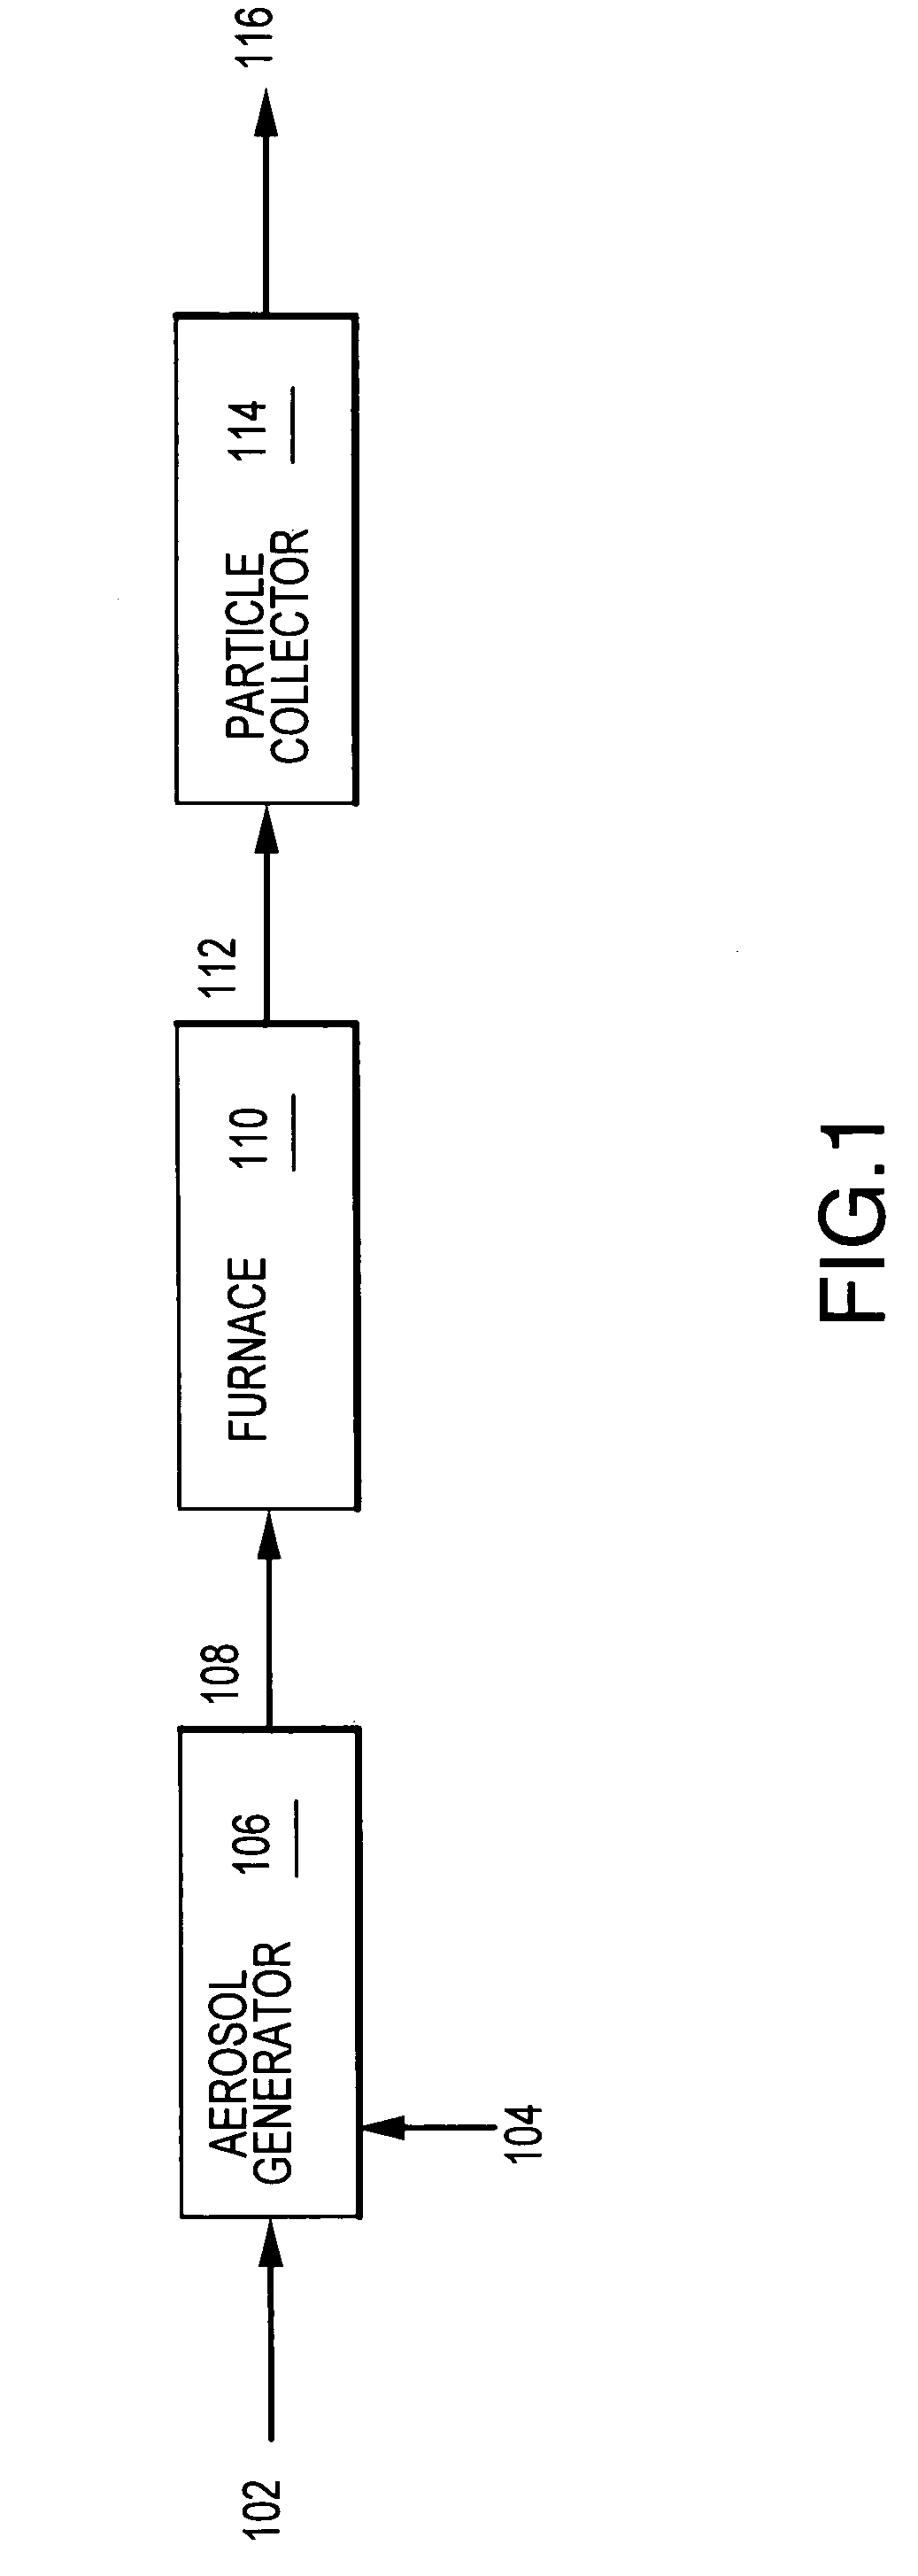 Photoluminescent phosphor powders, methods for making phosphor powders and devices incorporating same